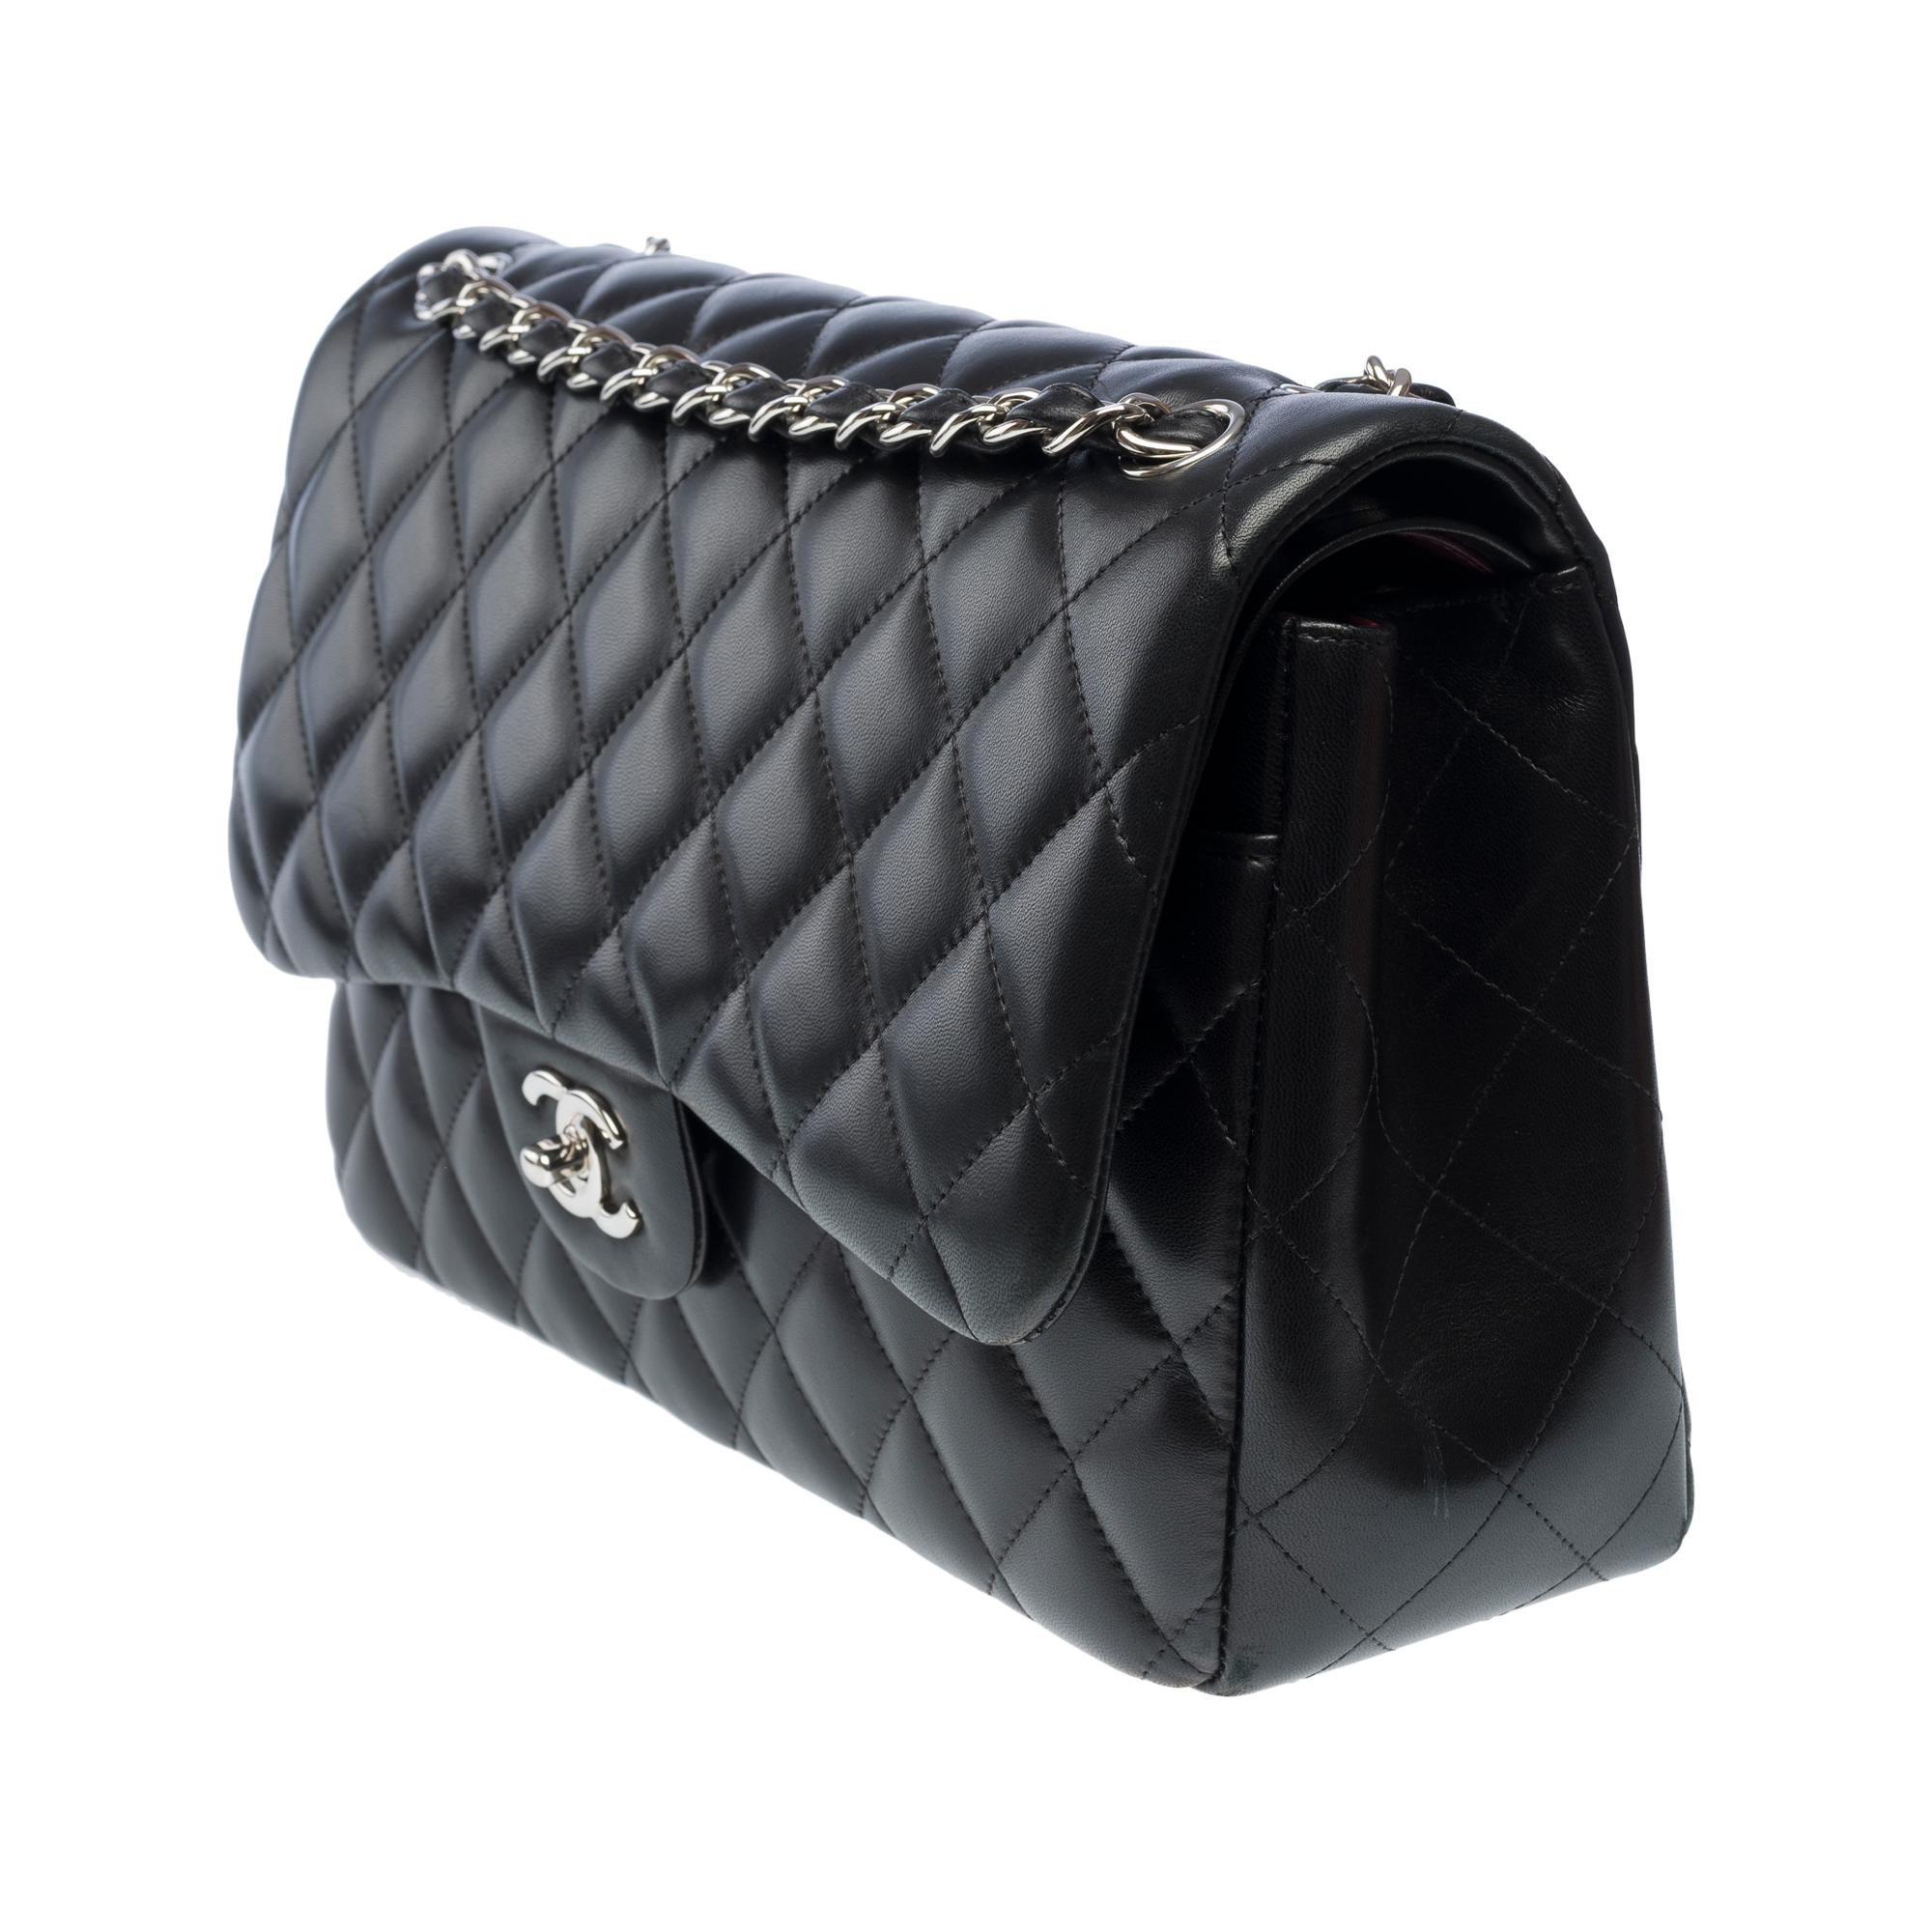 Chanel Timeless Jumbo double flap shoulder bag in black quilted lambskin , SHW For Sale 1